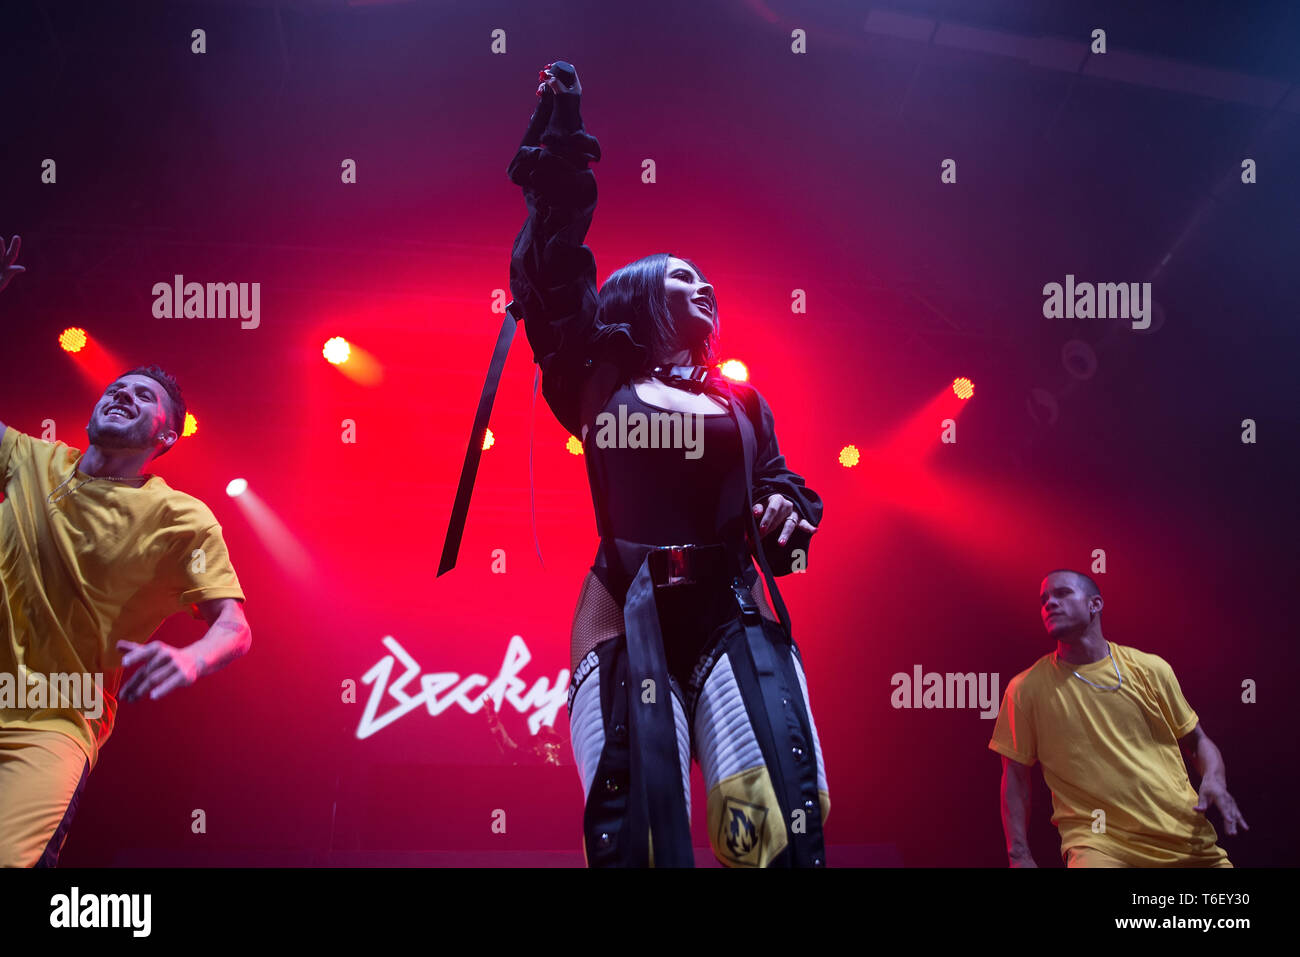 BARCELONA - OCT 7: Becky G (latino pop and reggaeton band) perform in concert at Razzmatazz stage on October 7, 2018 in Barcelona, Spain. Stock Photo